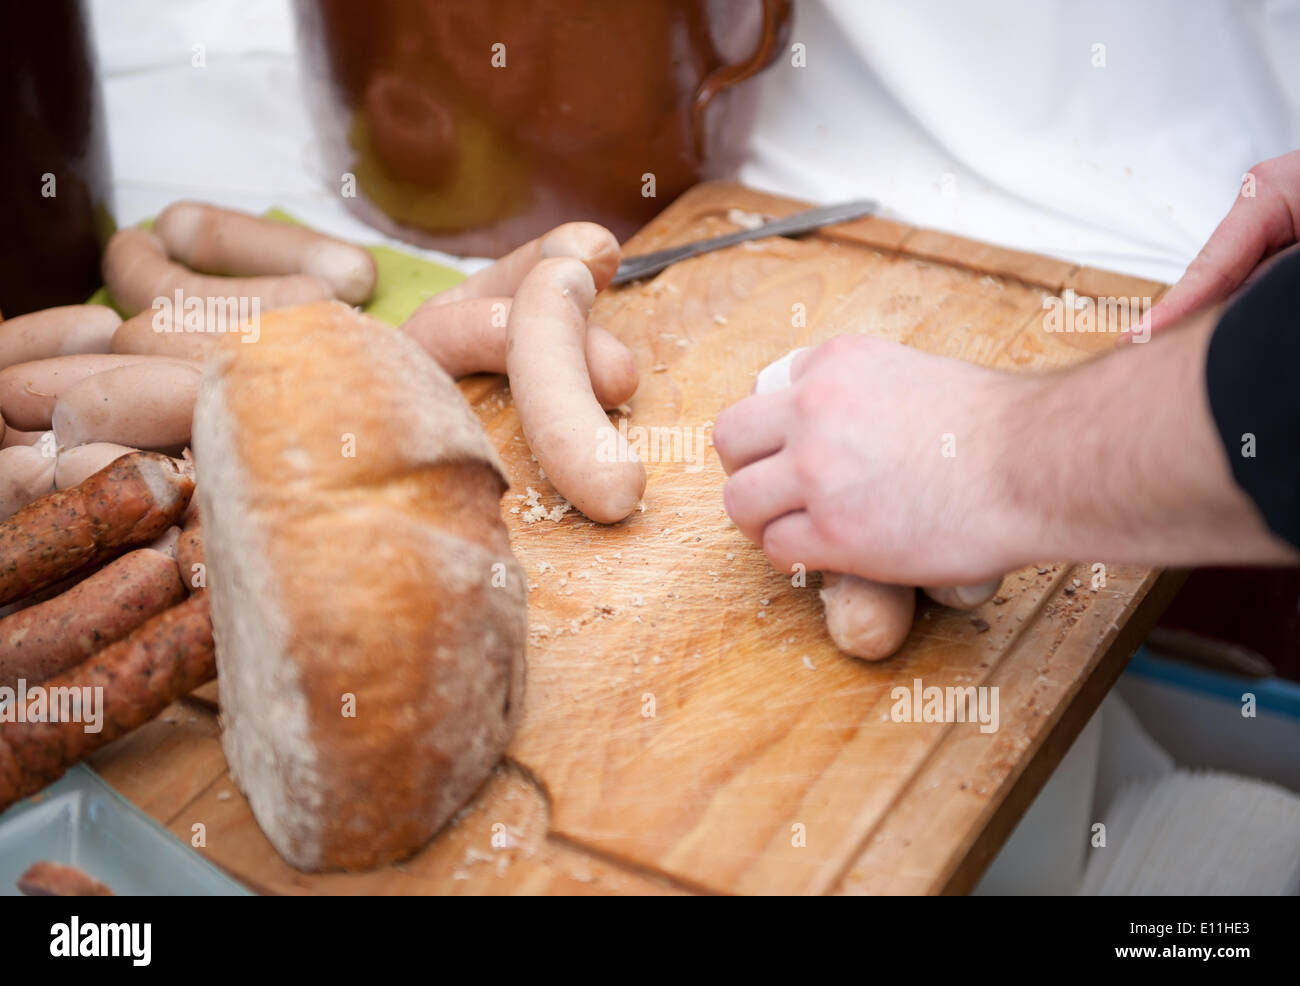 Warsaw, Poland, May 21, 2014, manifestation in defense of healthy food at Nowy Swiat street. Home made products demonstration against new law in Poland. Credit:  Arletta Cwalina/Alamy Live News Stock Photo